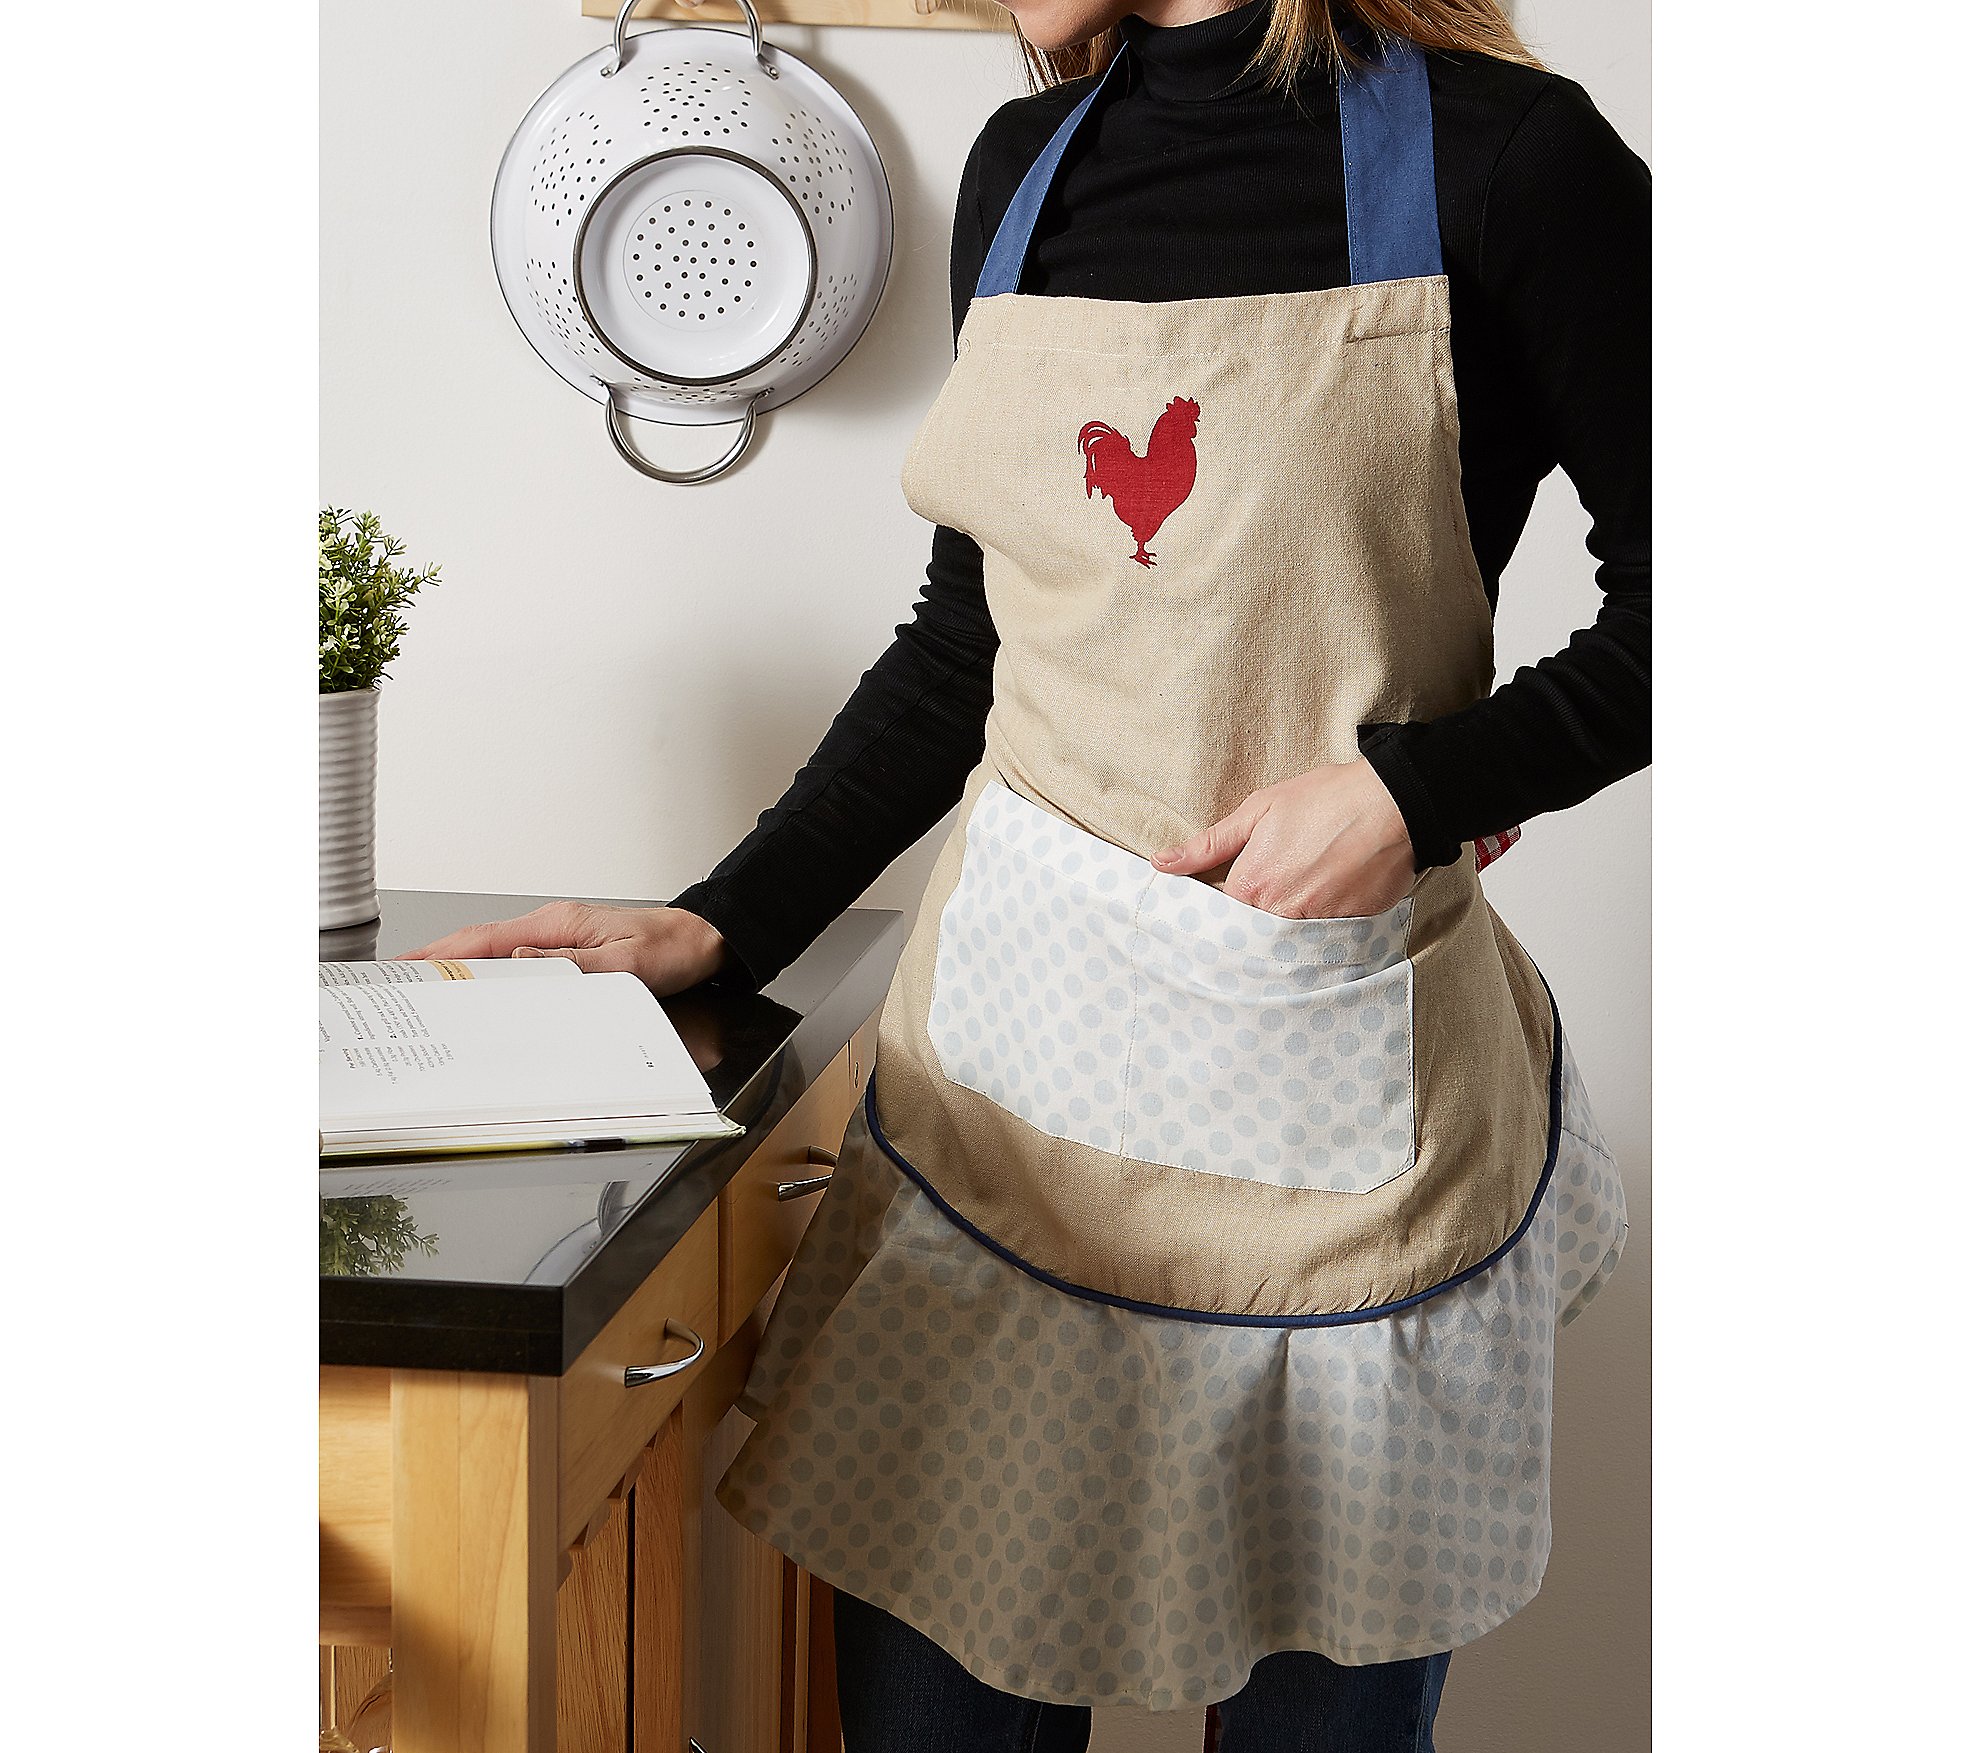 Design Imports Red Rooster Ruffle Apron